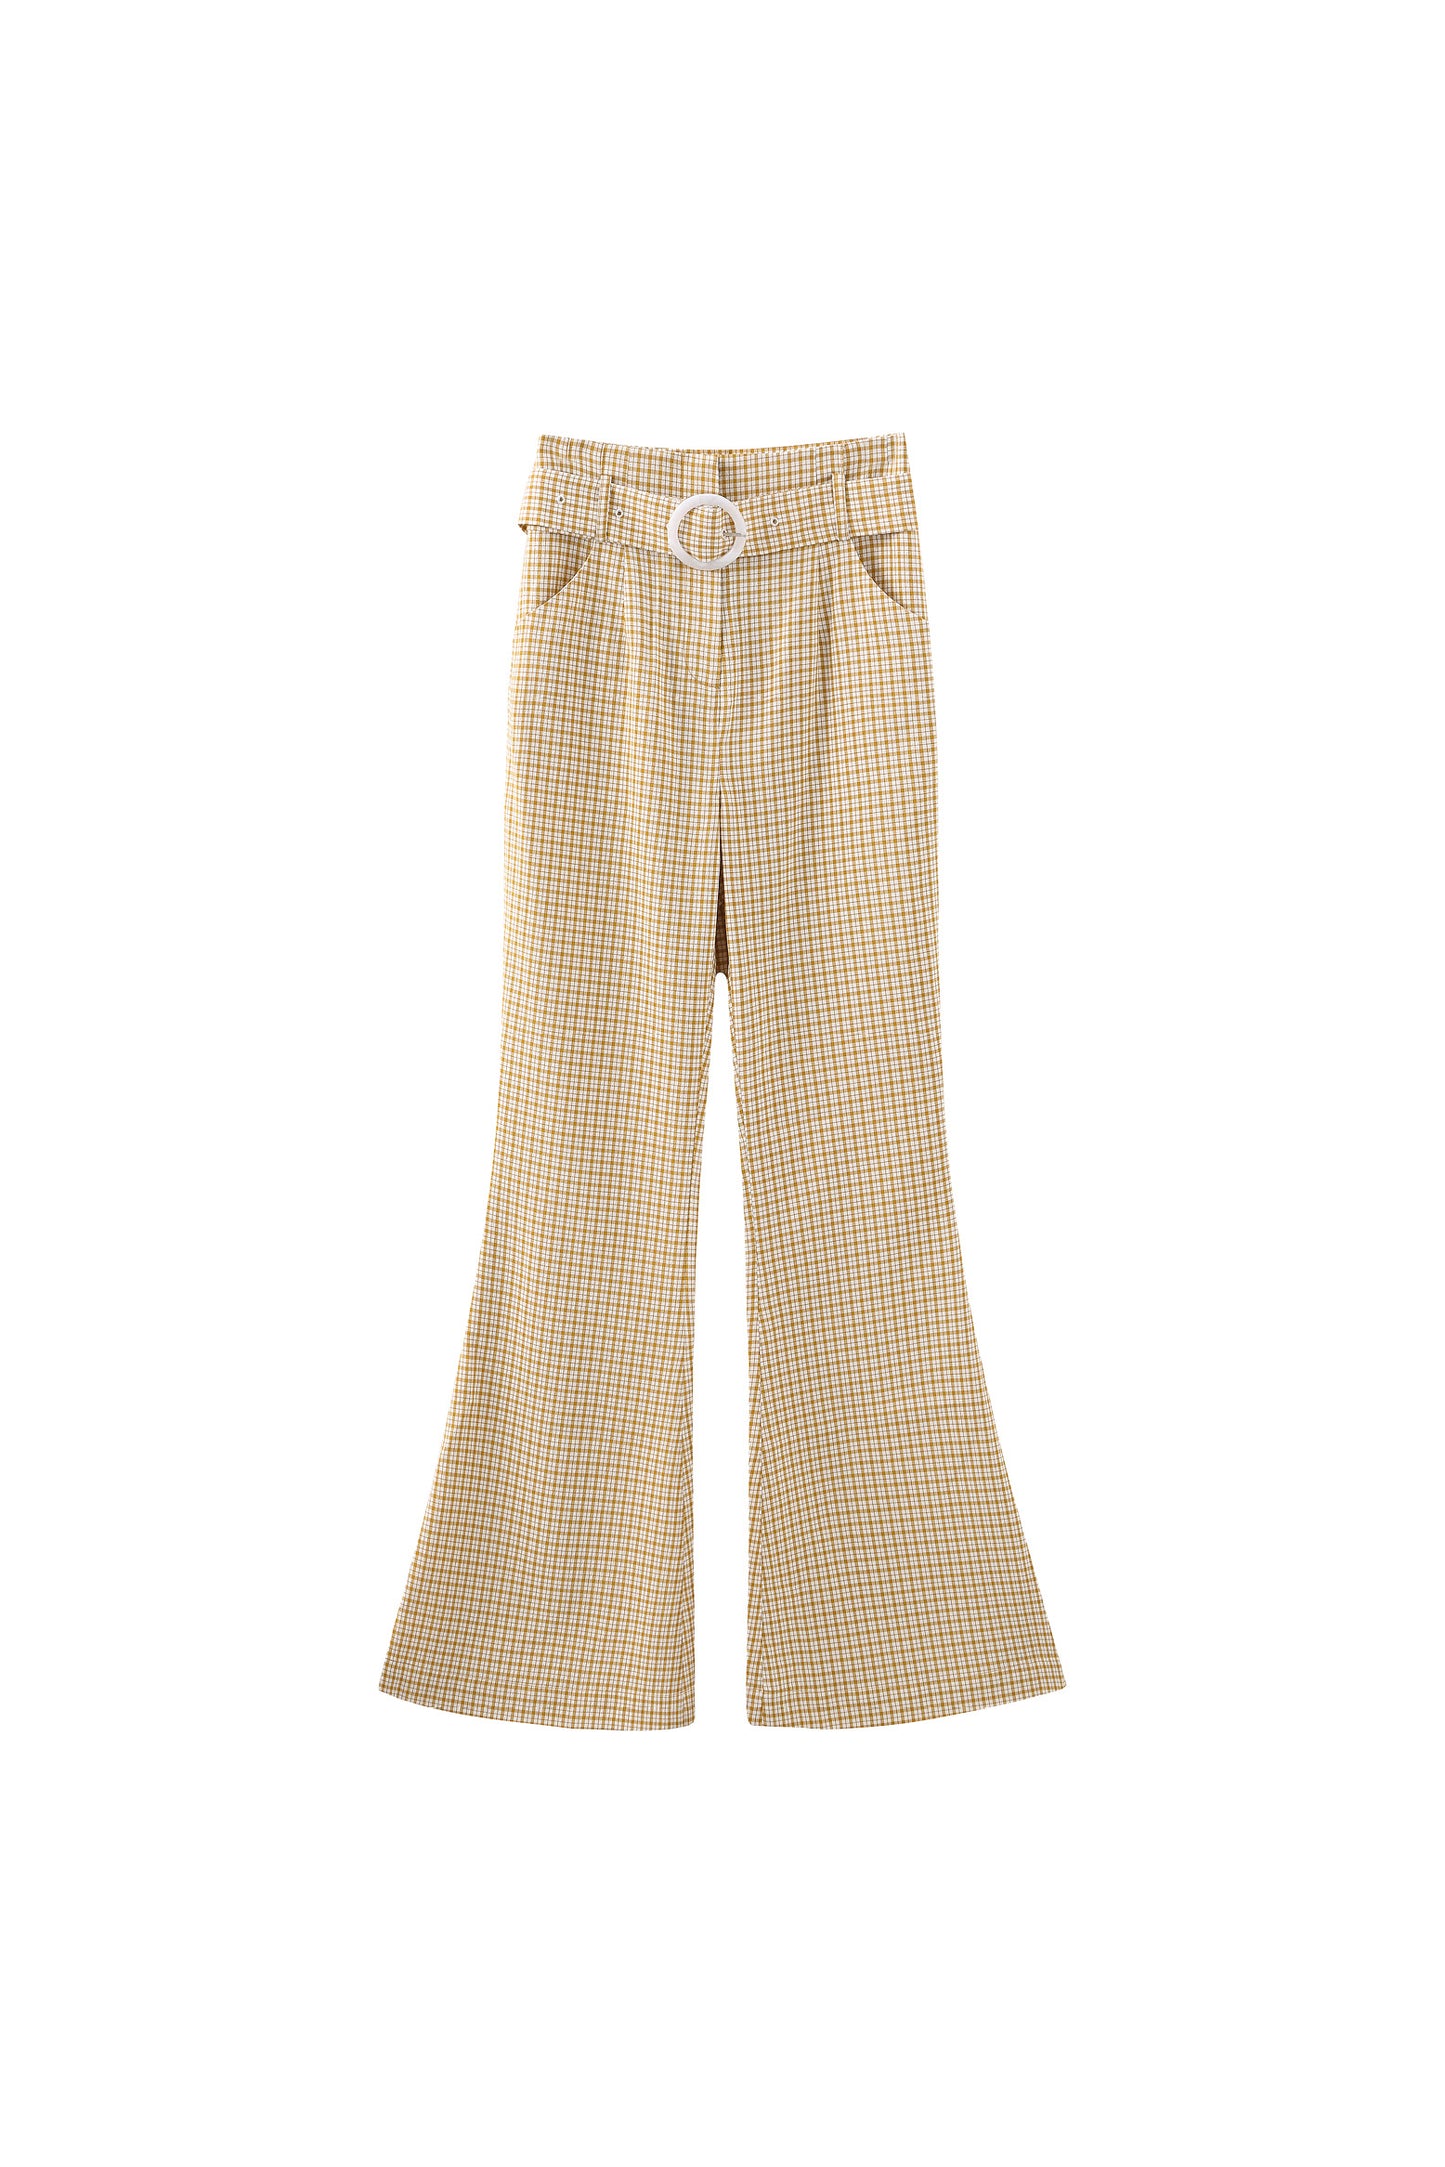 Patty Flare Trousers in Yellow Gingham